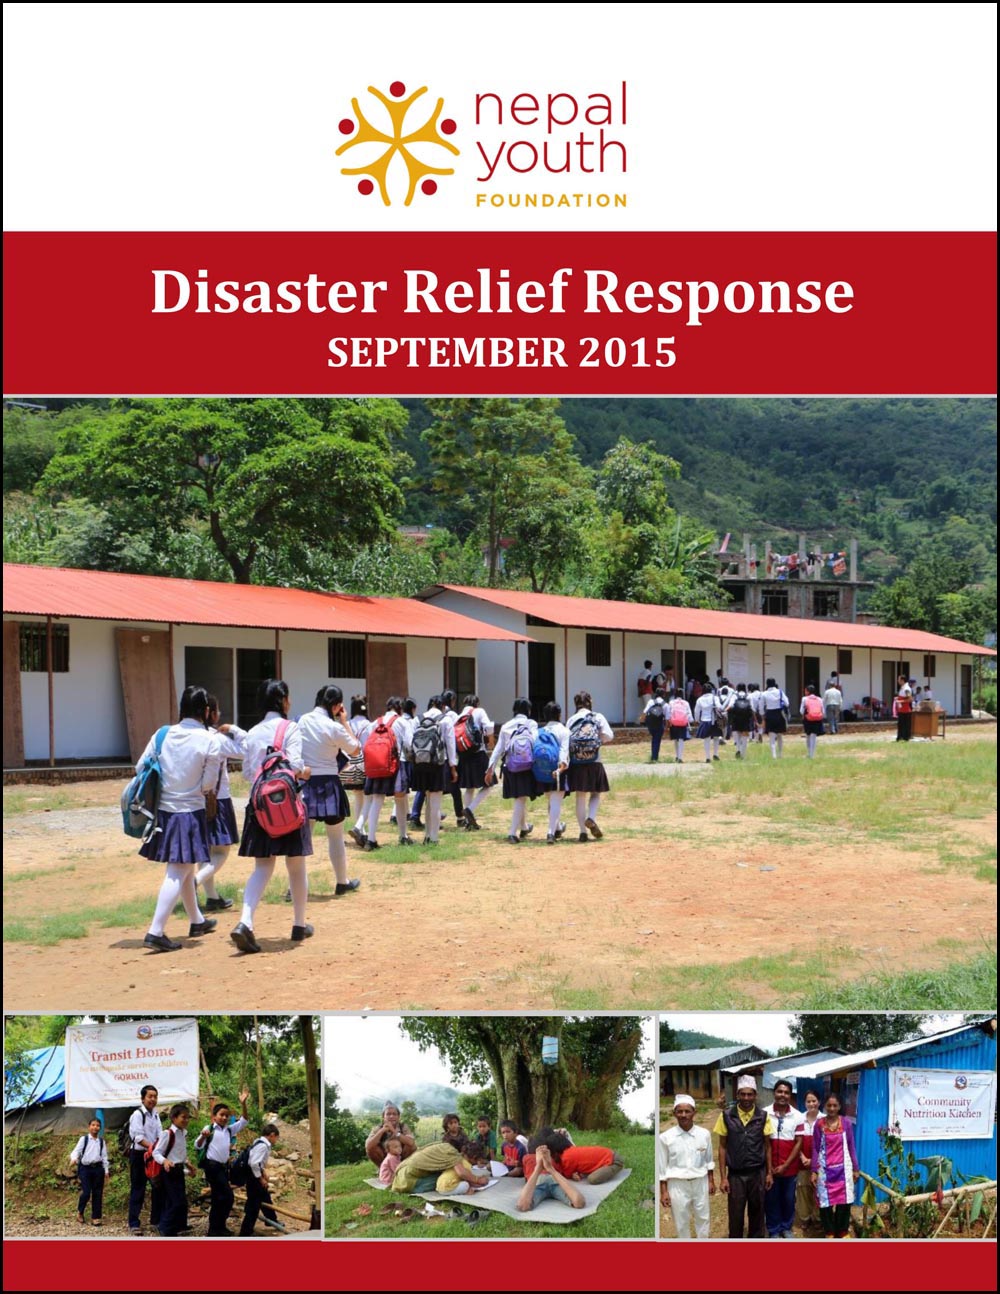 NYF's Disaster Relief Response, September 2015